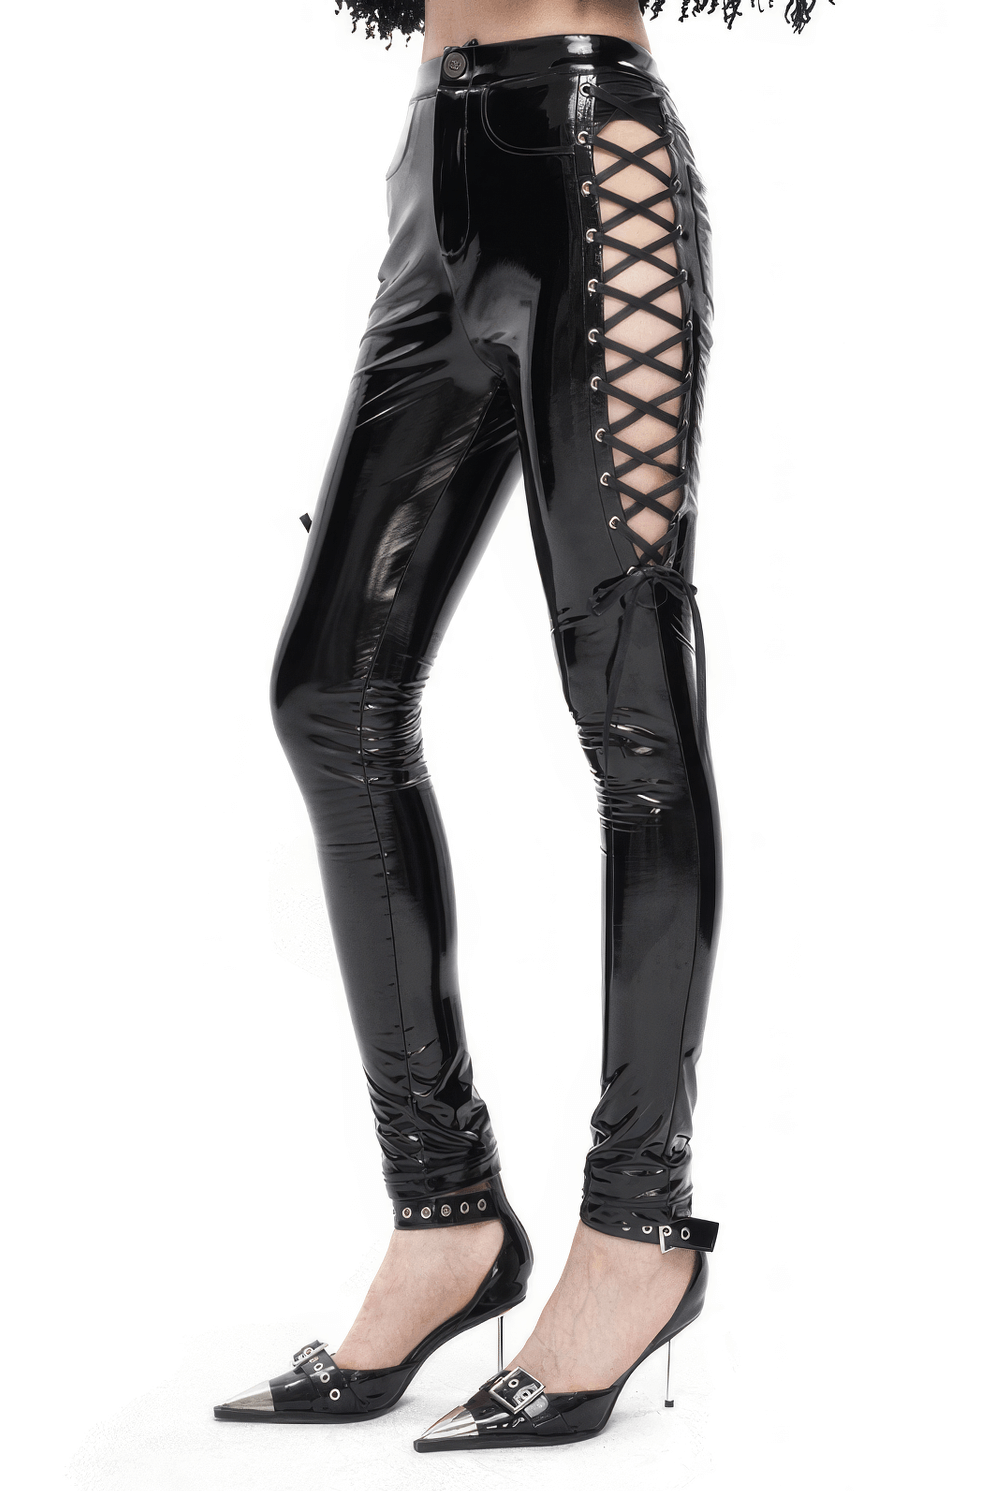 Women's Hollow Patent Leather Skinny Pants With Lace-Up on Sides